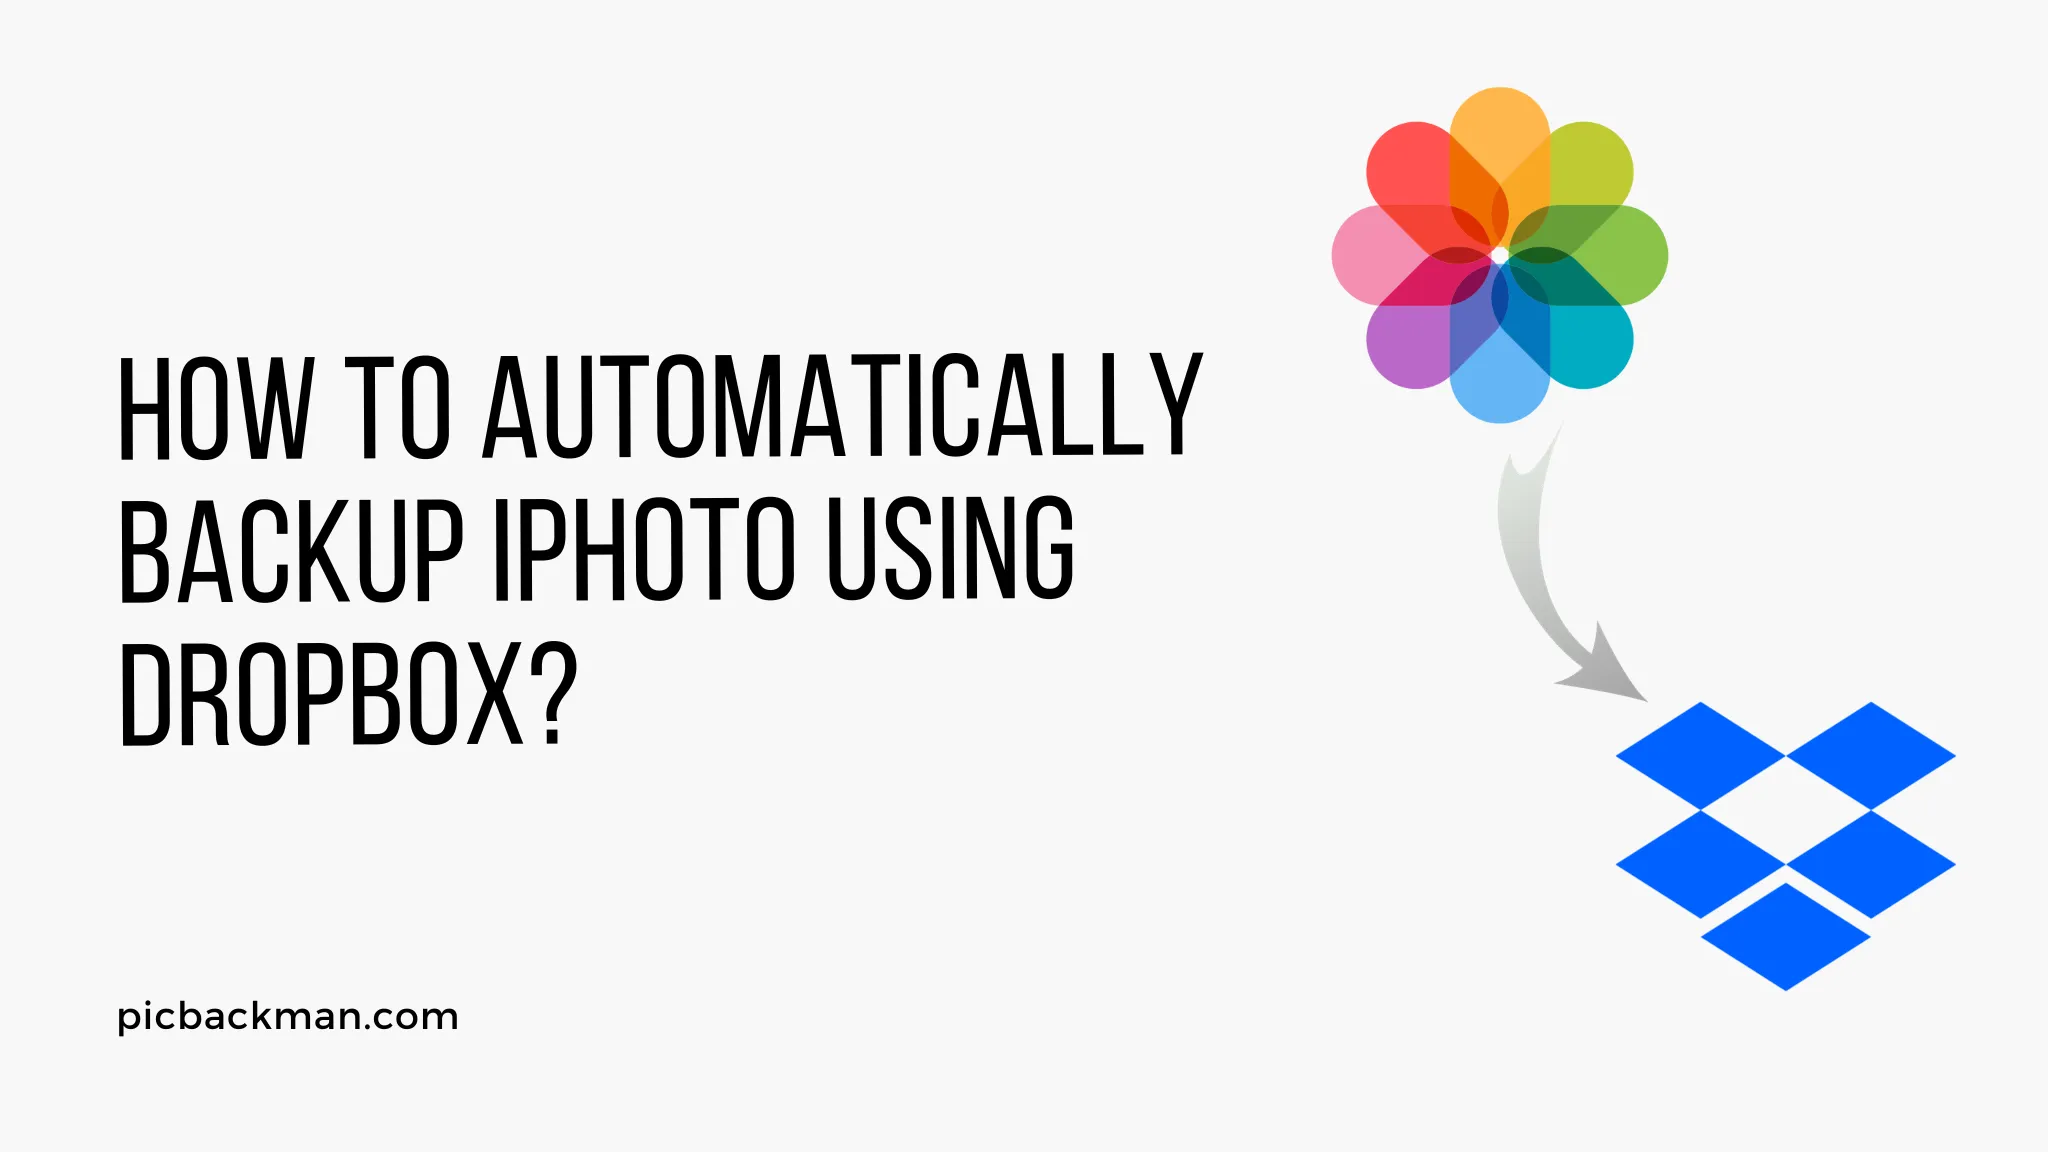 How to Automatically Backup iPhoto using Dropbox